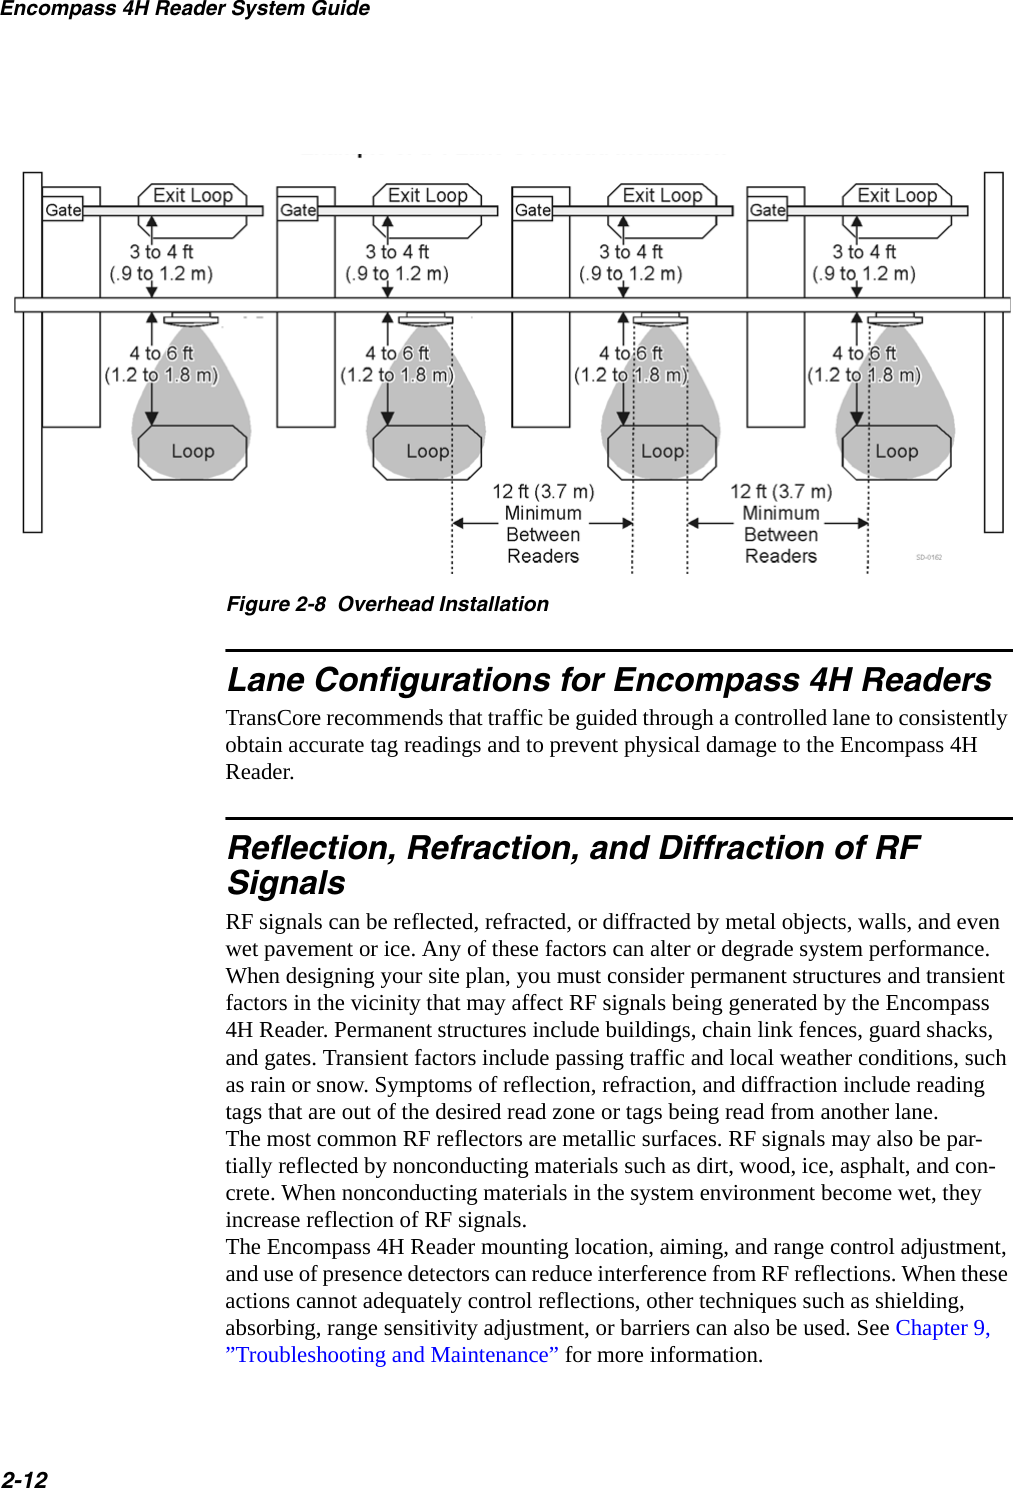 Encompass 4H Reader System Guide2-12 Figure 2-8  Overhead InstallationLane Configurations for Encompass 4H Readers TransCore recommends that traffic be guided through a controlled lane to consistently obtain accurate tag readings and to prevent physical damage to the Encompass 4H Reader.Reflection, Refraction, and Diffraction of RF SignalsRF signals can be reflected, refracted, or diffracted by metal objects, walls, and even wet pavement or ice. Any of these factors can alter or degrade system performance. When designing your site plan, you must consider permanent structures and transient factors in the vicinity that may affect RF signals being generated by the Encompass 4H Reader. Permanent structures include buildings, chain link fences, guard shacks, and gates. Transient factors include passing traffic and local weather conditions, such as rain or snow. Symptoms of reflection, refraction, and diffraction include reading tags that are out of the desired read zone or tags being read from another lane.The most common RF reflectors are metallic surfaces. RF signals may also be par-tially reflected by nonconducting materials such as dirt, wood, ice, asphalt, and con-crete. When nonconducting materials in the system environment become wet, they increase reflection of RF signals.The Encompass 4H Reader mounting location, aiming, and range control adjustment, and use of presence detectors can reduce interference from RF reflections. When these actions cannot adequately control reflections, other techniques such as shielding, absorbing, range sensitivity adjustment, or barriers can also be used. See Chapter 9, ”Troubleshooting and Maintenance” for more information.